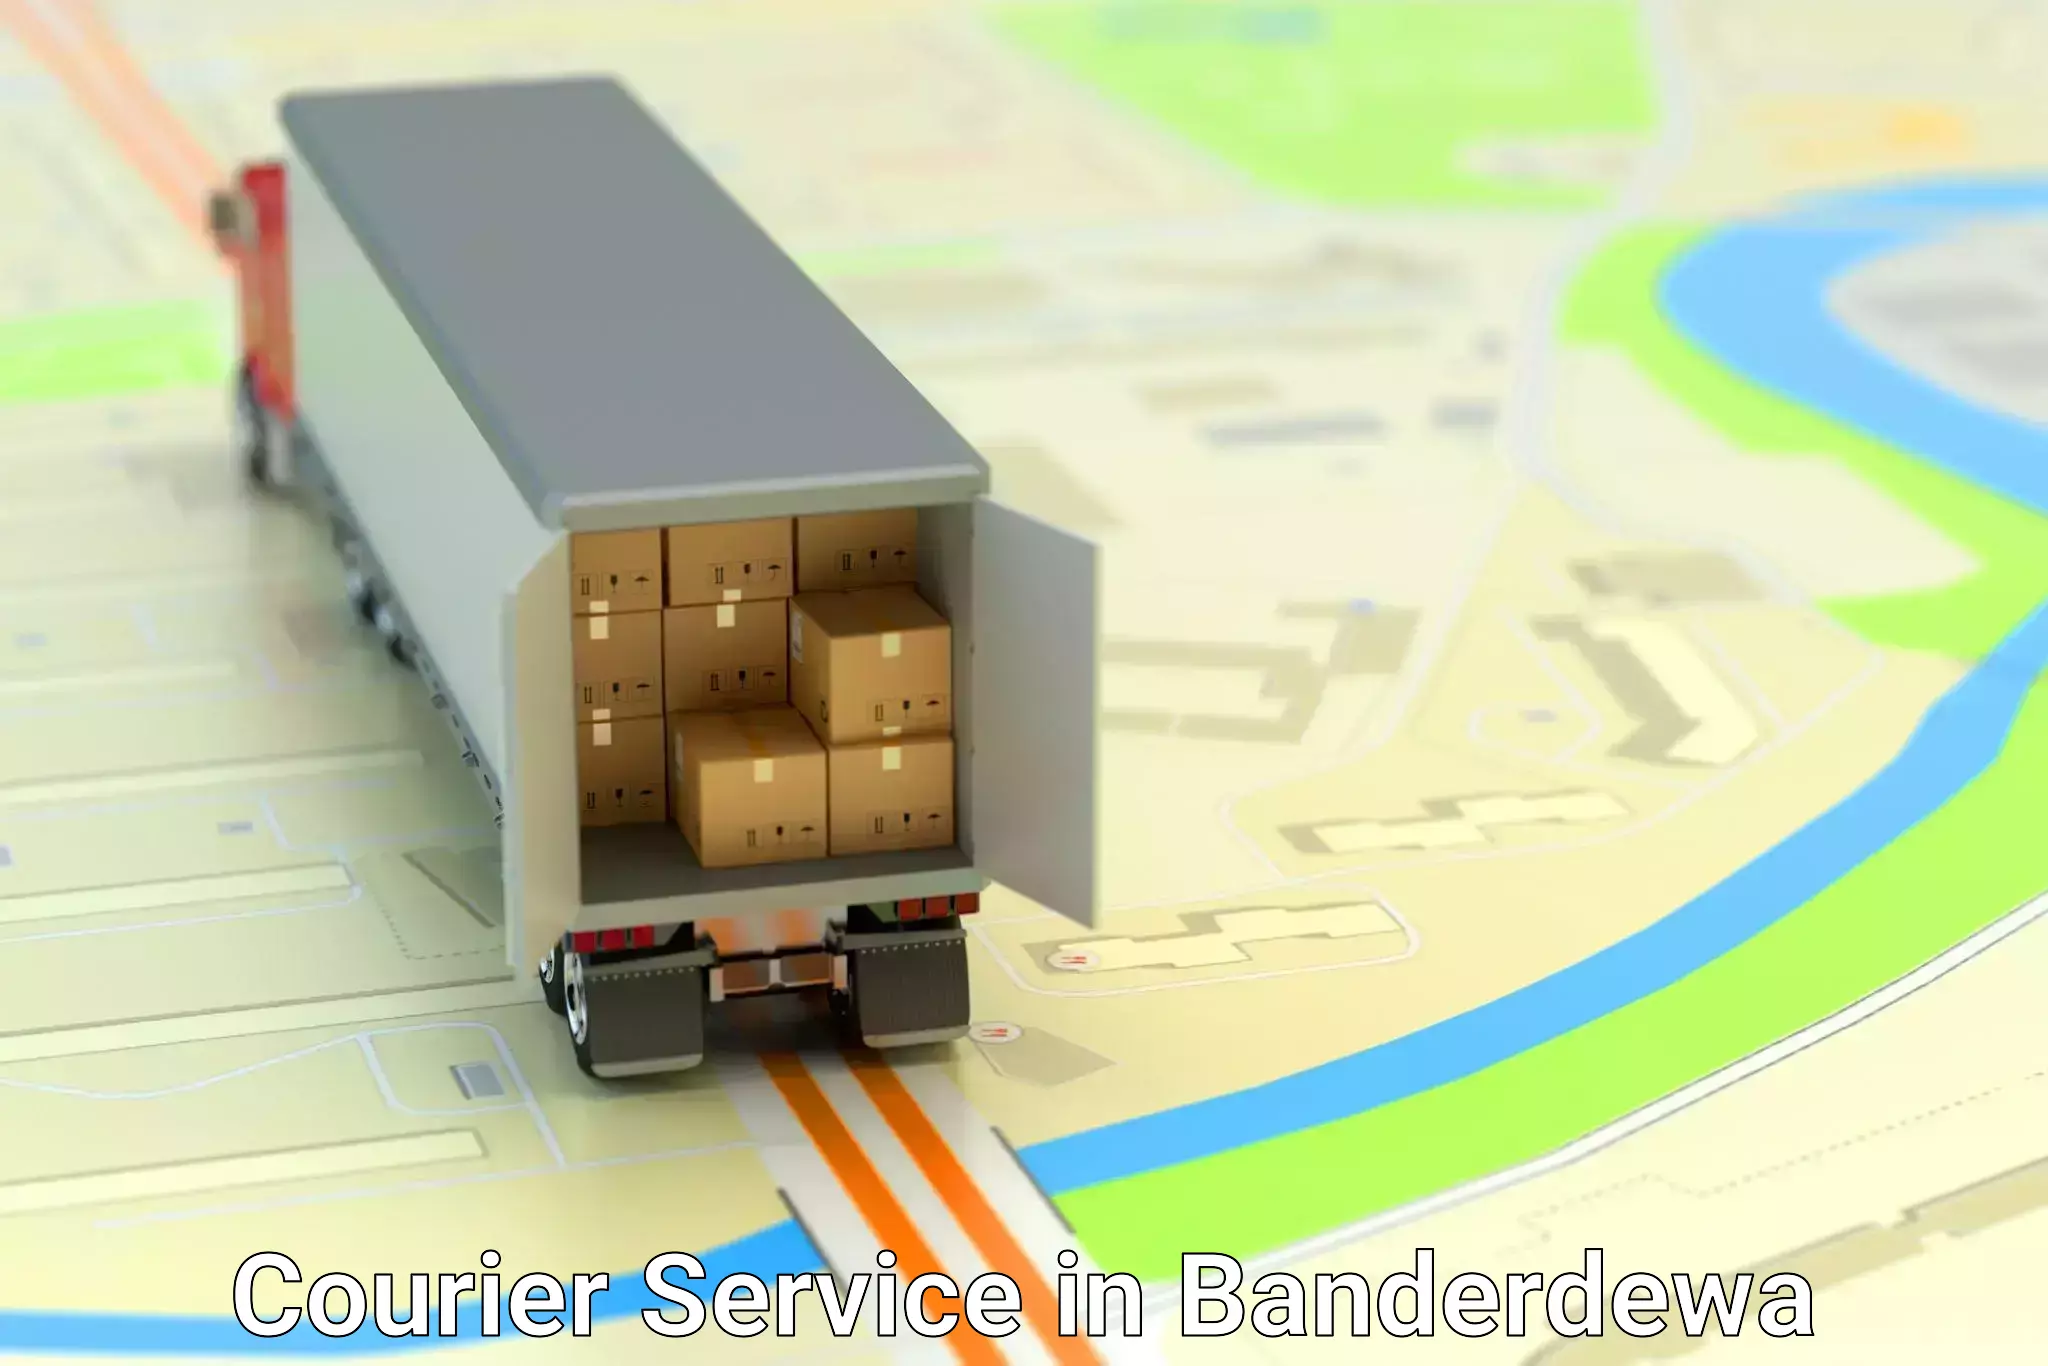 Postal and courier services in Banderdewa